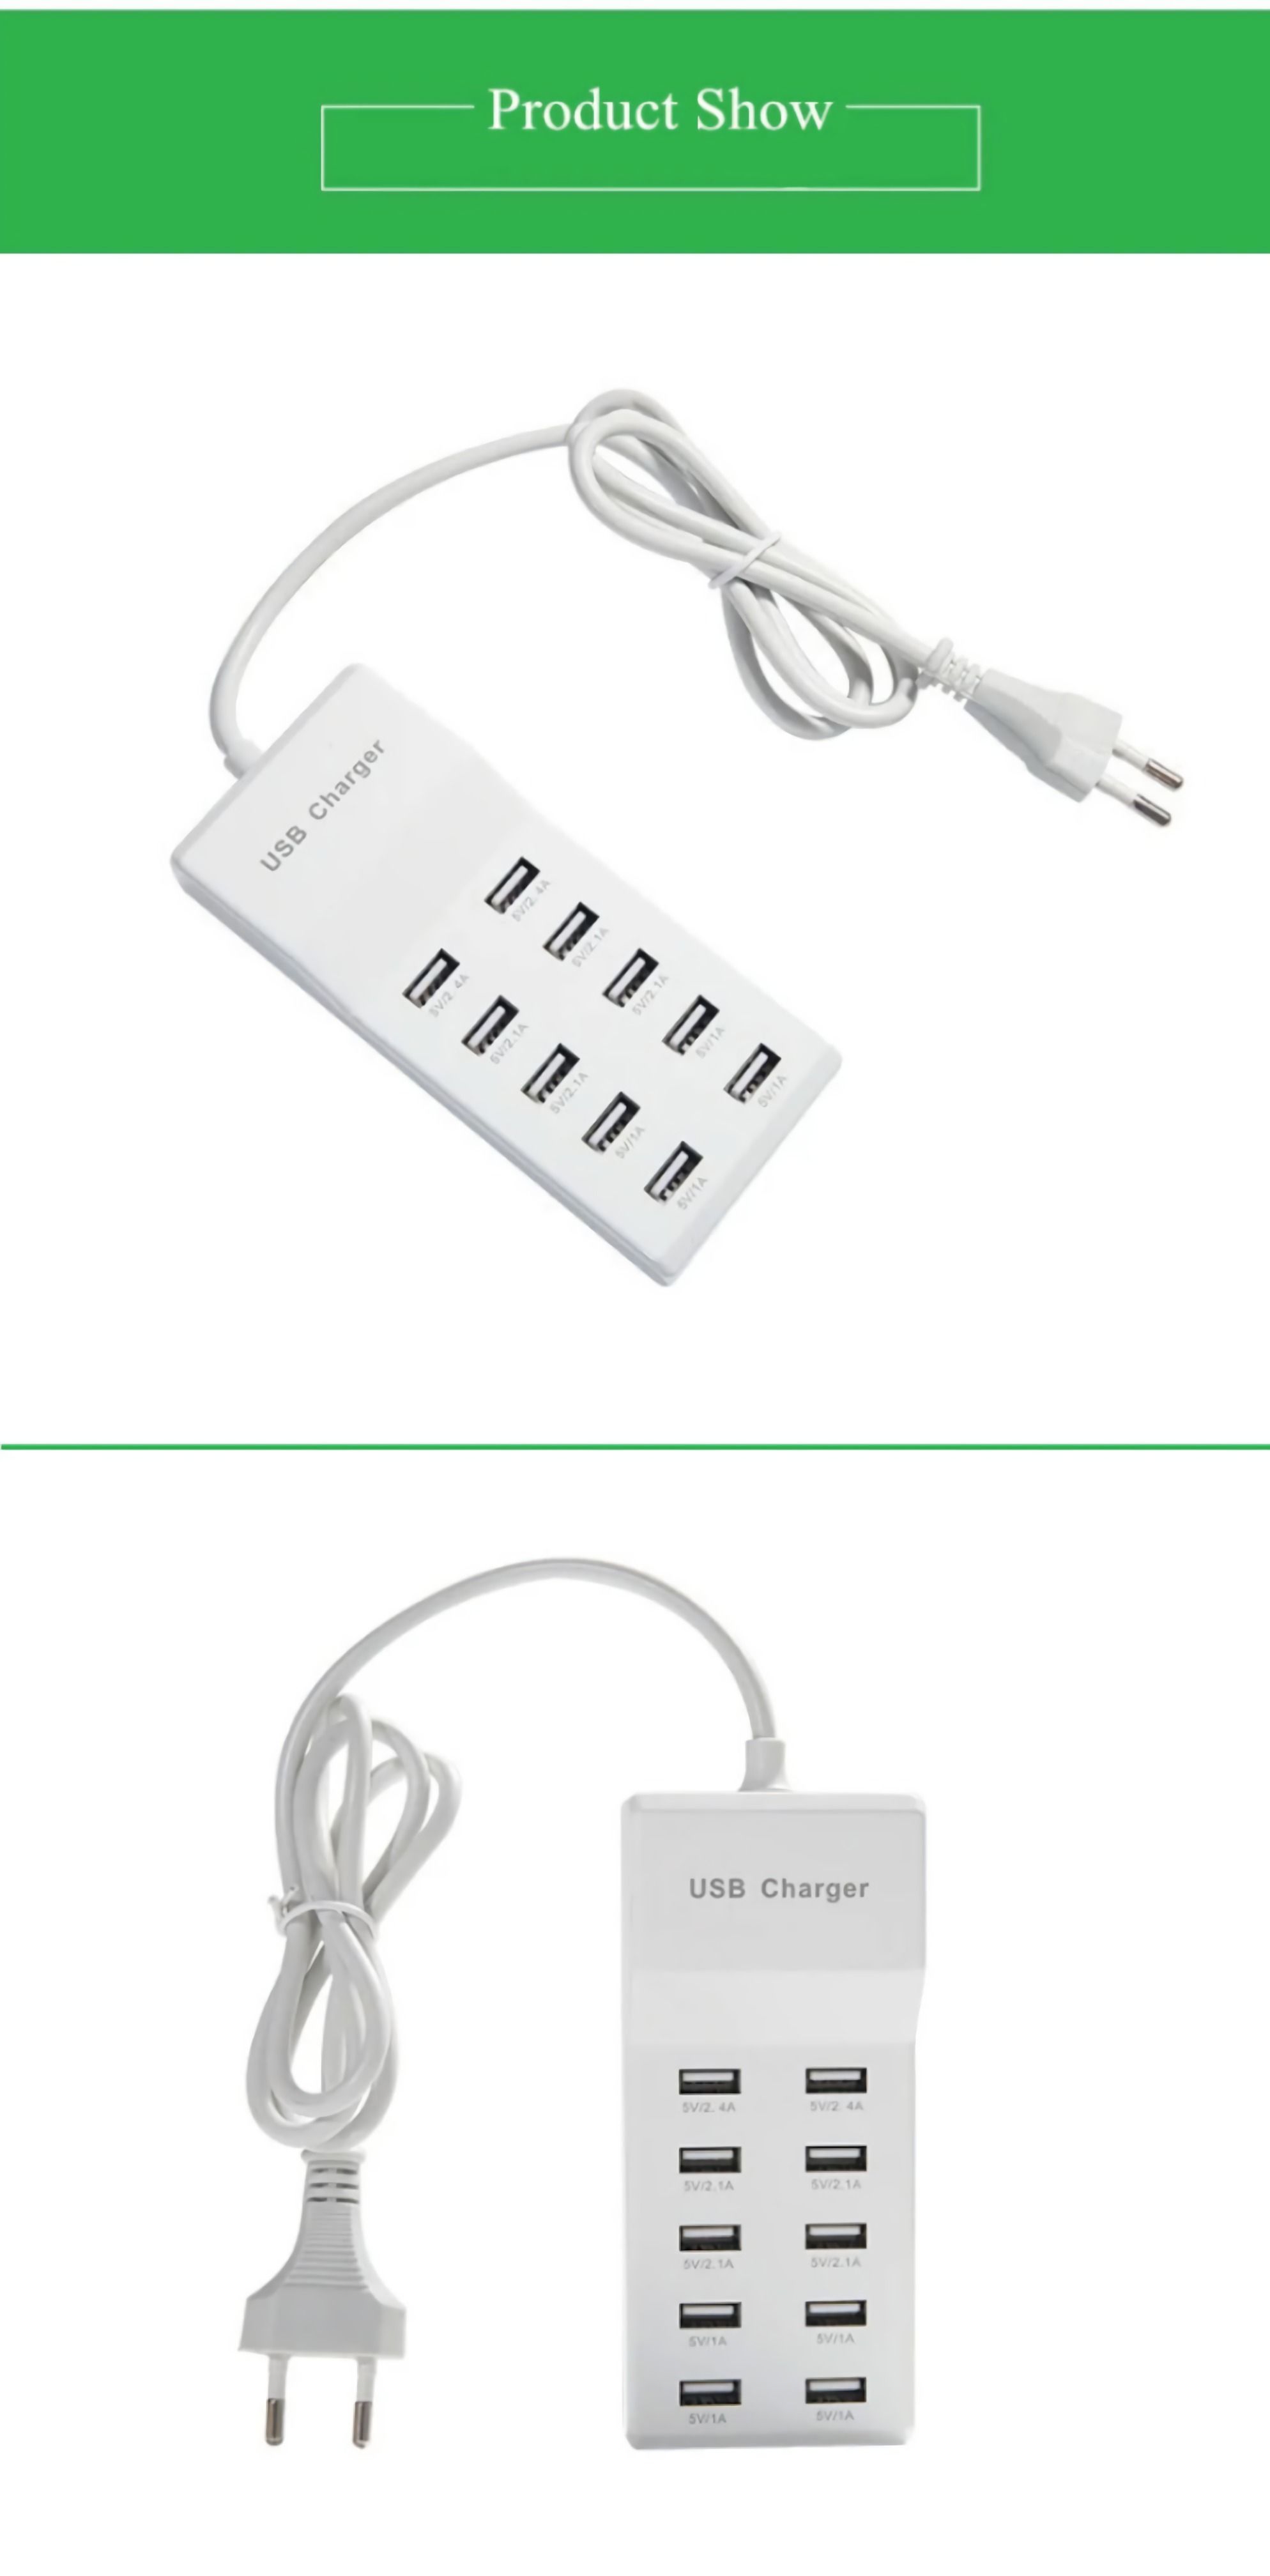 10-Port-USB-Tablet-Charger-EU-Plug-5V-24A-Wall-Charger-Hubs-for-Samsung-Huawei-Tablets-Phone-Pad-Fas-1658734